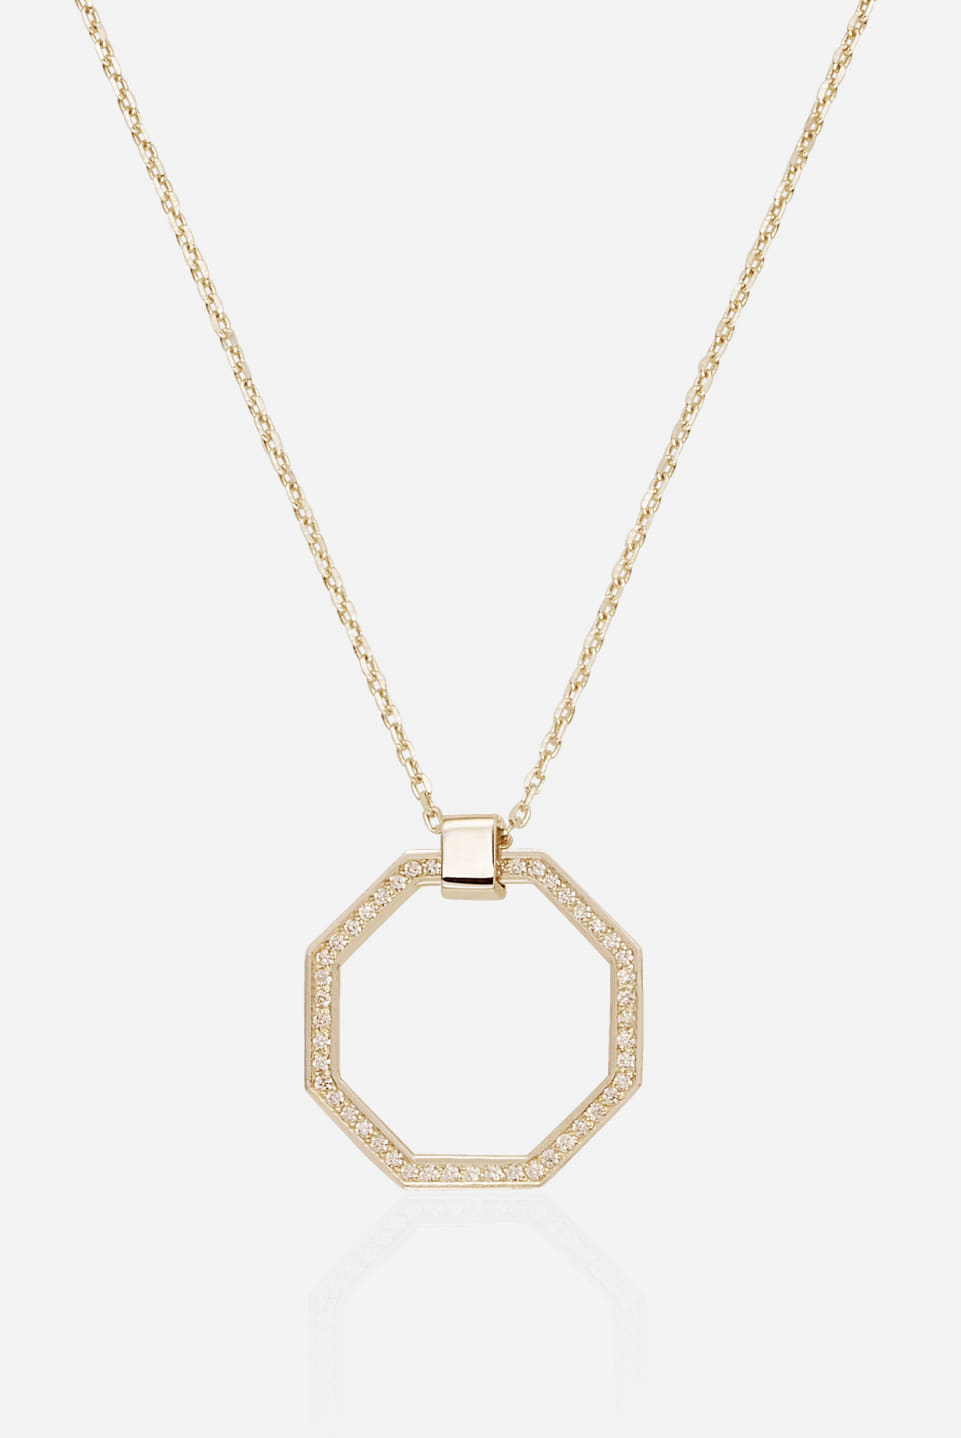 Genta Necklace in Gold